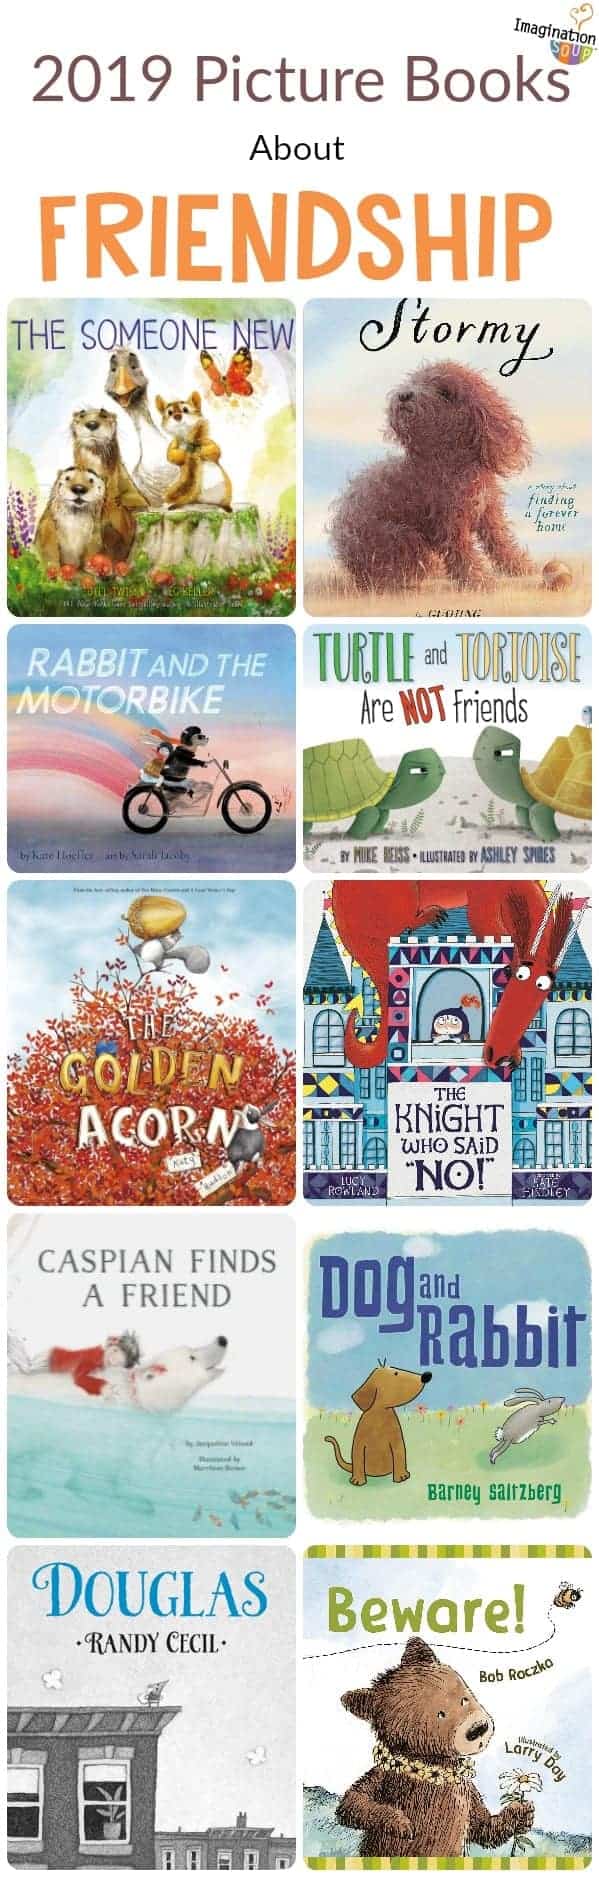 2019 picture books about friendship